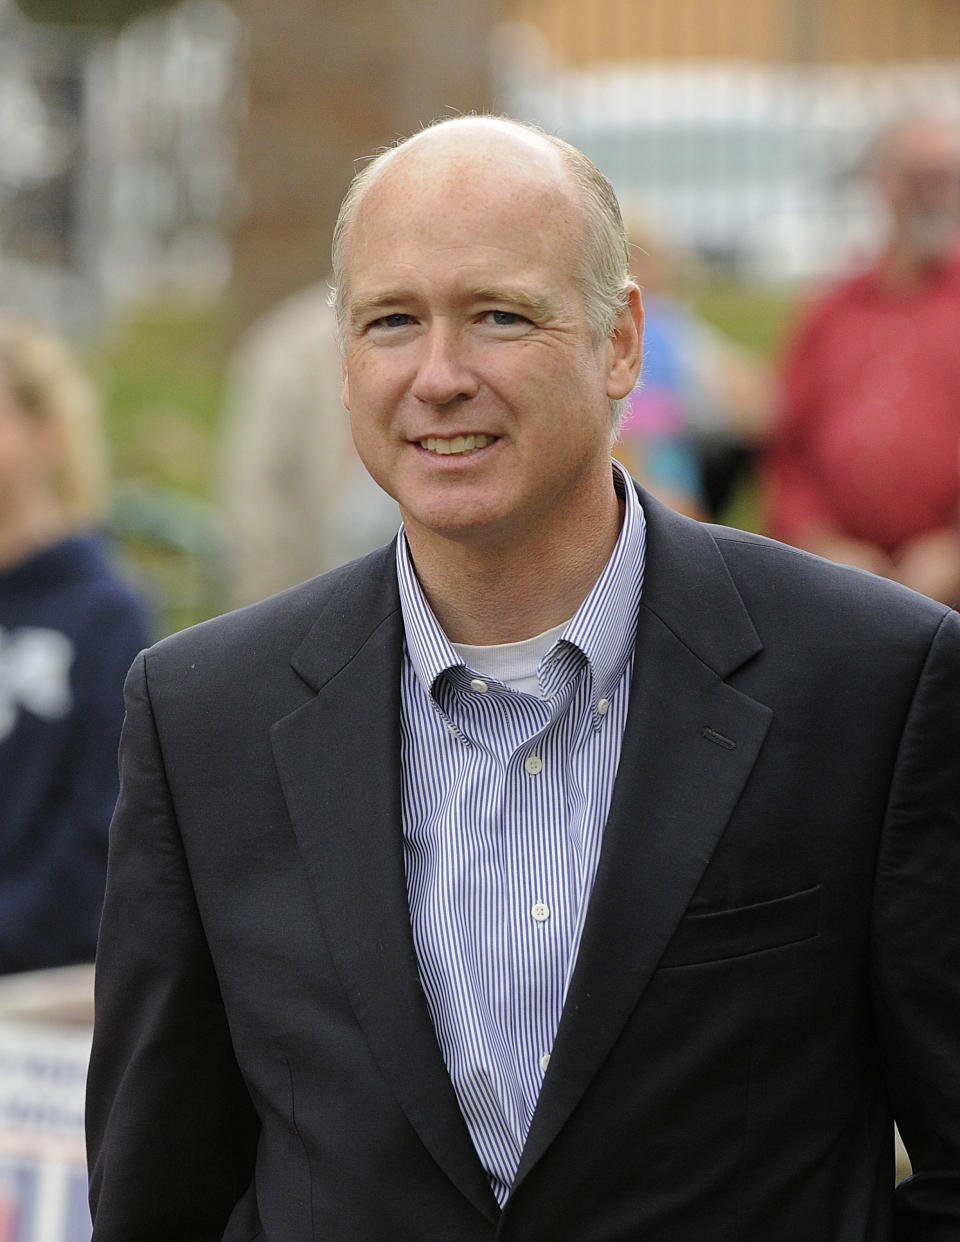 File - U.S. Rep. Robert Aderholt, R-Ala., is photographed on Oct. 6, 2012, at the DeKalb County Tea Party rally in Ft. Payne, Ala., on Oct. 6, 2012. Aderholt faces Democrat Rick Neighbors and one other opponent, as he seeks reelection to Alabama's Fourth Congressional District. (AP Photo/The Huntsville Times, Bob Gathany, File)/The Huntsville Times via AP)